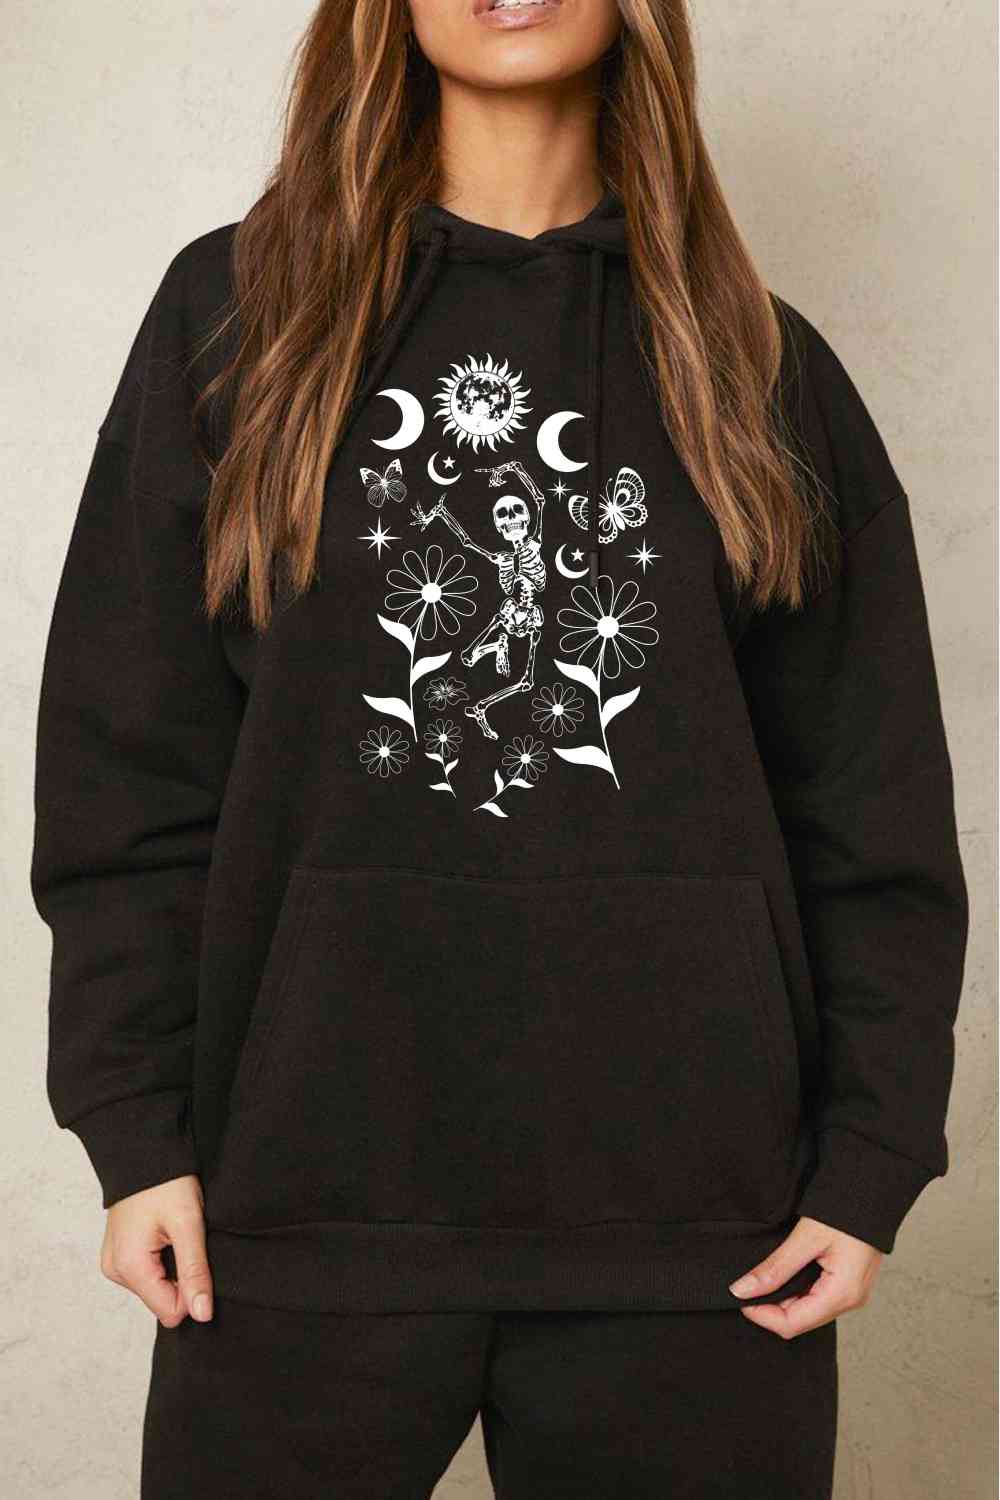 Simply Love Simply Love Full Size Dancing Skeleton Graphic Hoodie - Guy Christopher 